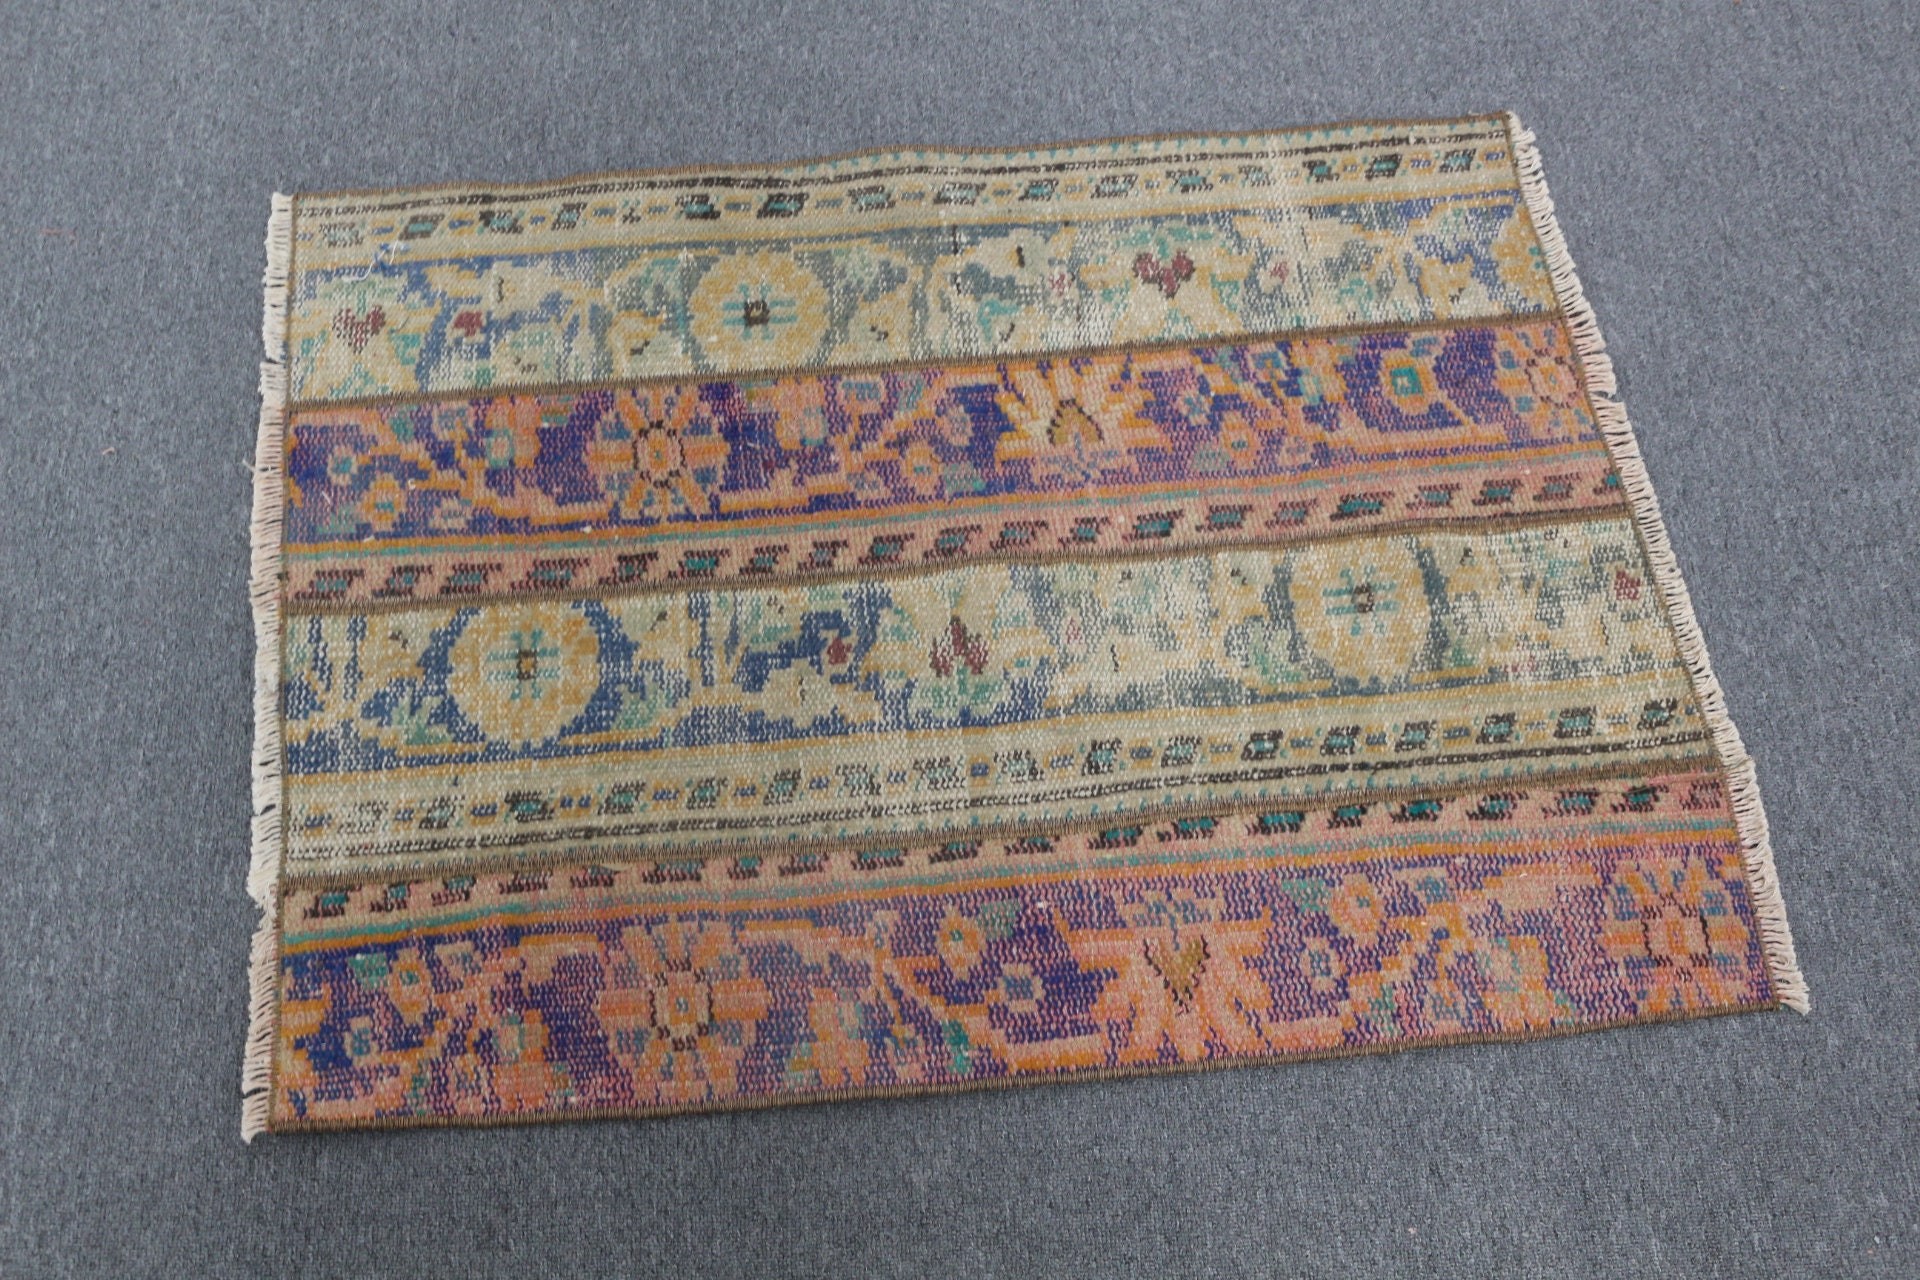 Turkish Rug, Vintage Rug, Blue Oushak Rugs, Bathroom Rug, Anatolian Rugs, Cool Rugs, Kitchen Rug, 2.4x3.1 ft Small Rug, Rugs for Entry